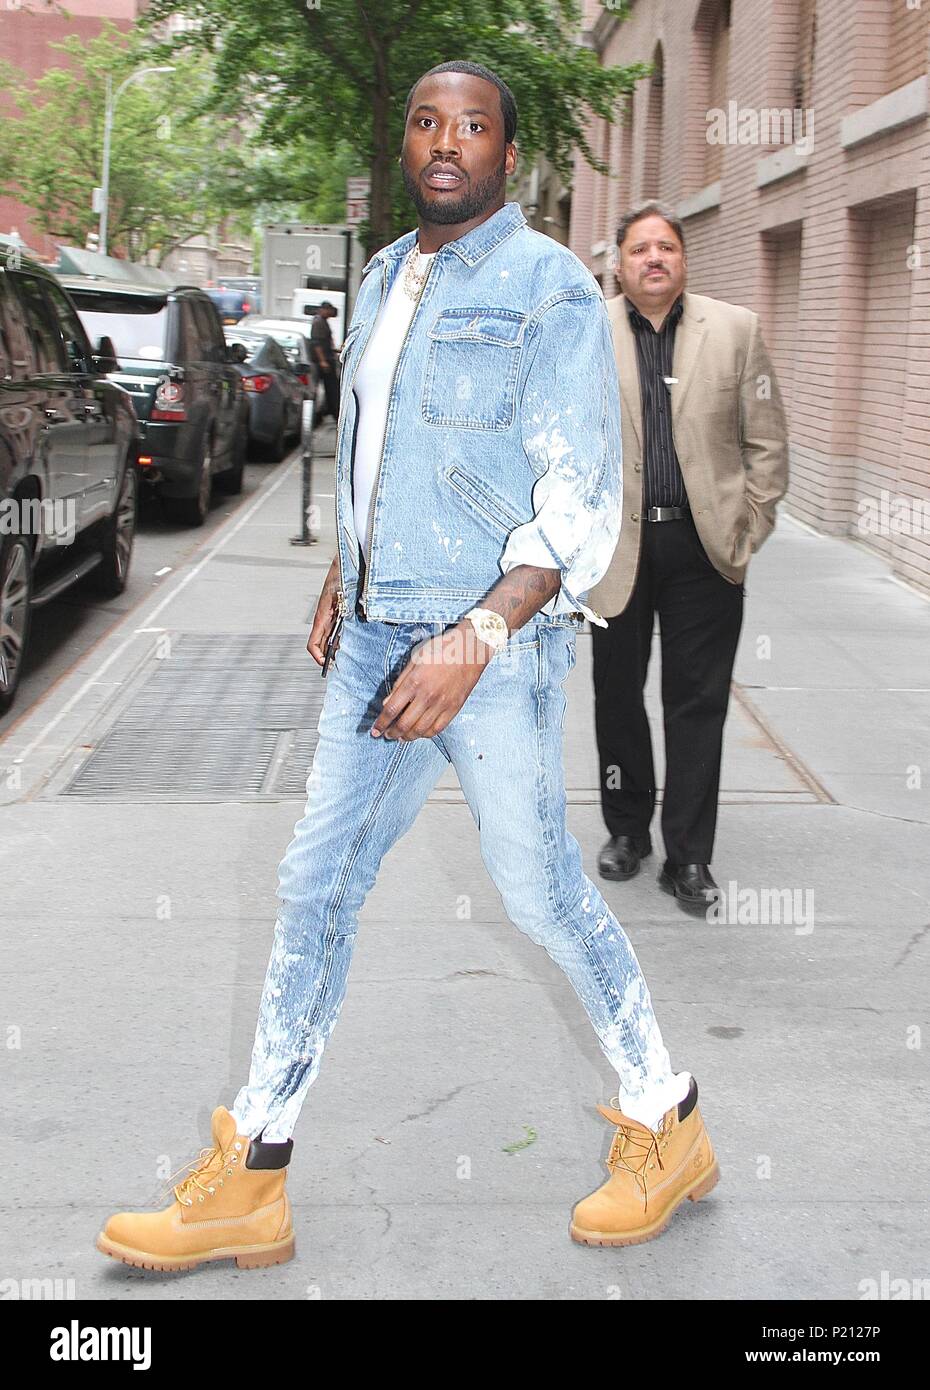 Meek mill  Bespoke fashion, Timberland boots outfit, Printed